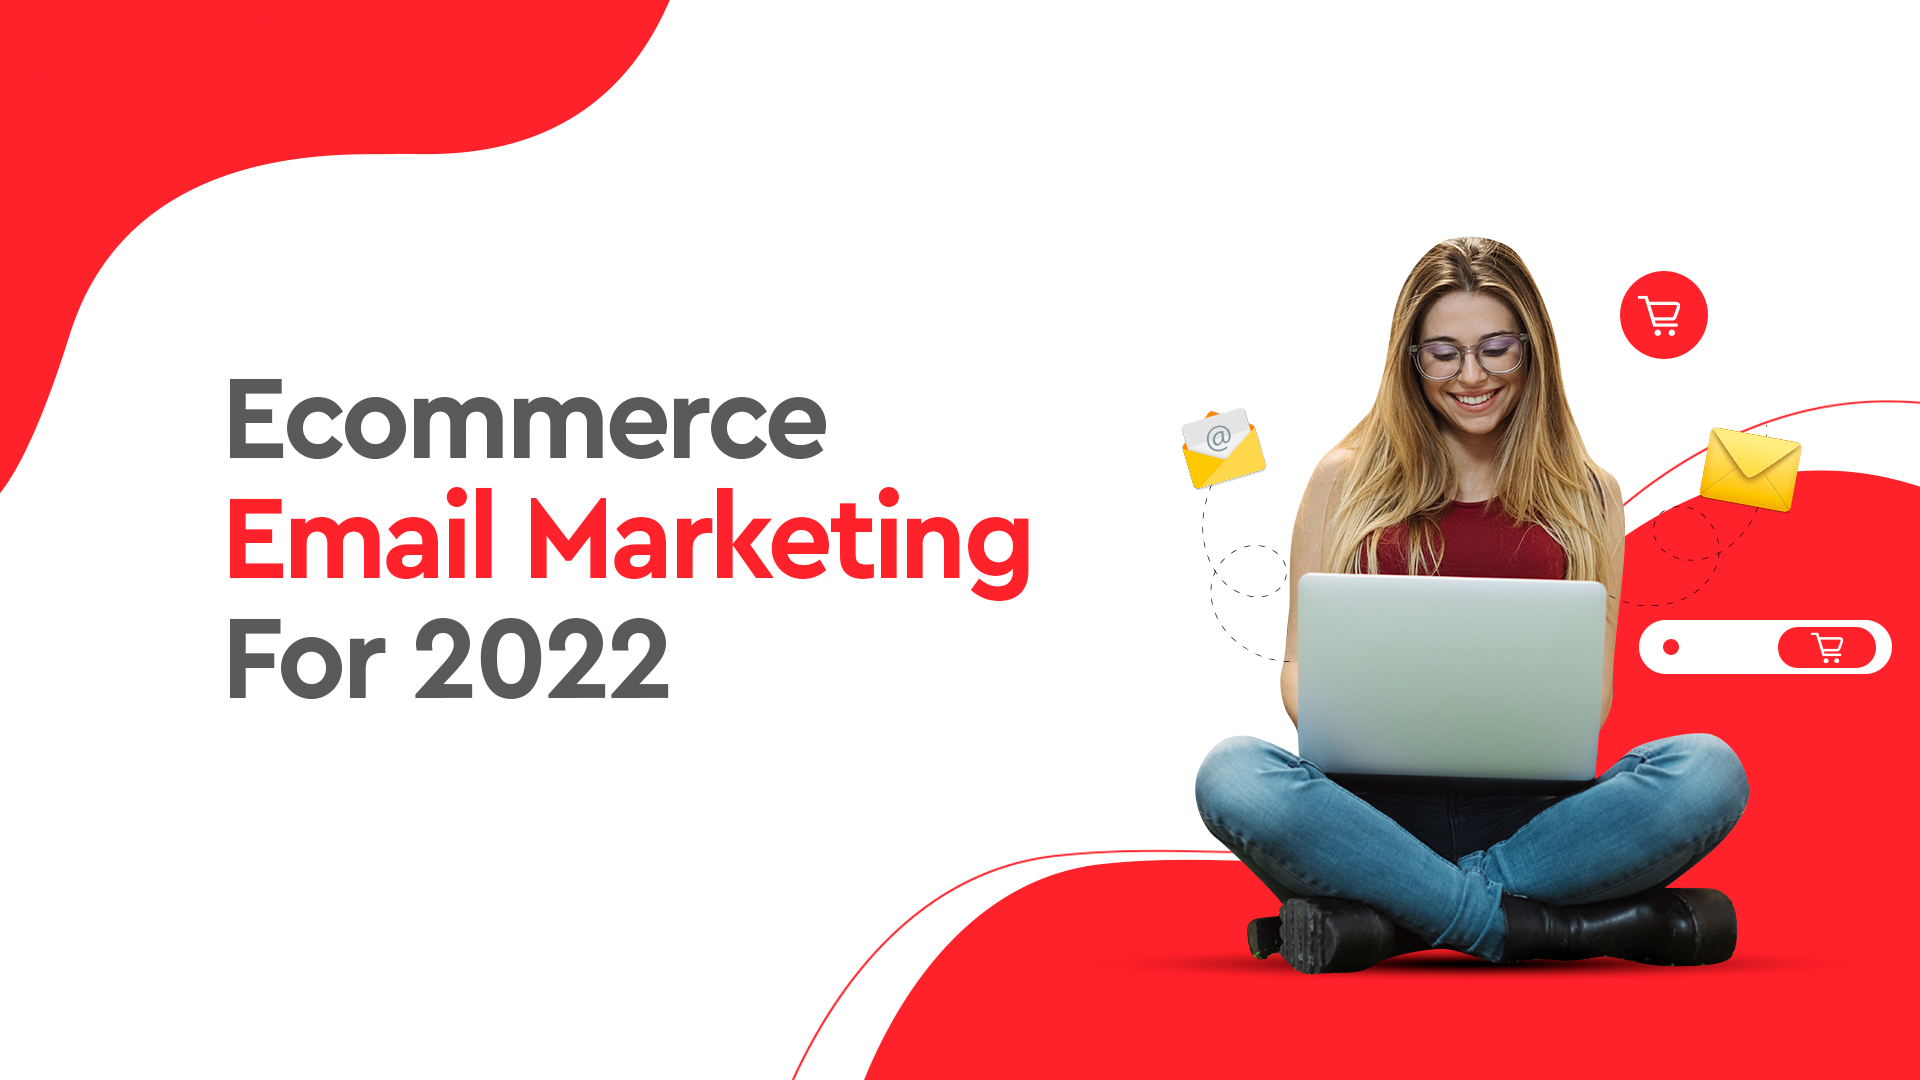 Ecommerce Email Marketing For 2022